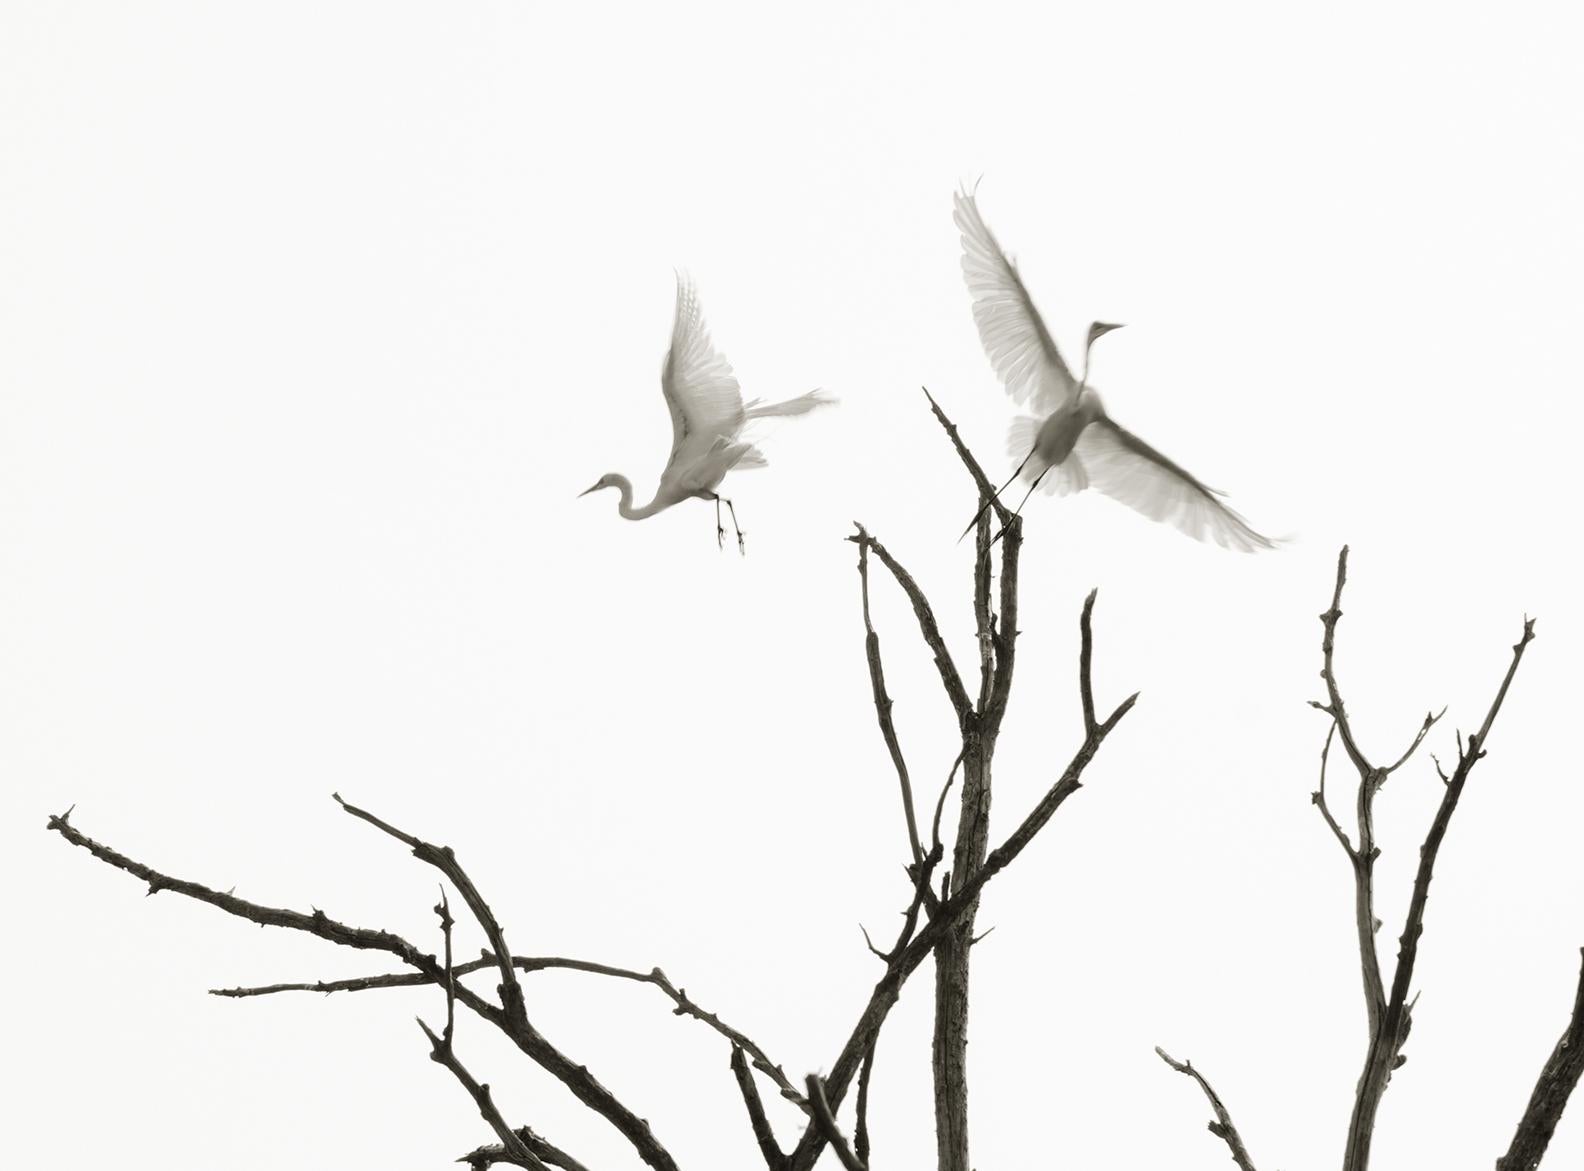 Ron Tarver Figurative Photograph - Egrets in Flight: black & white photograph, silhouette of birds & trees in sky